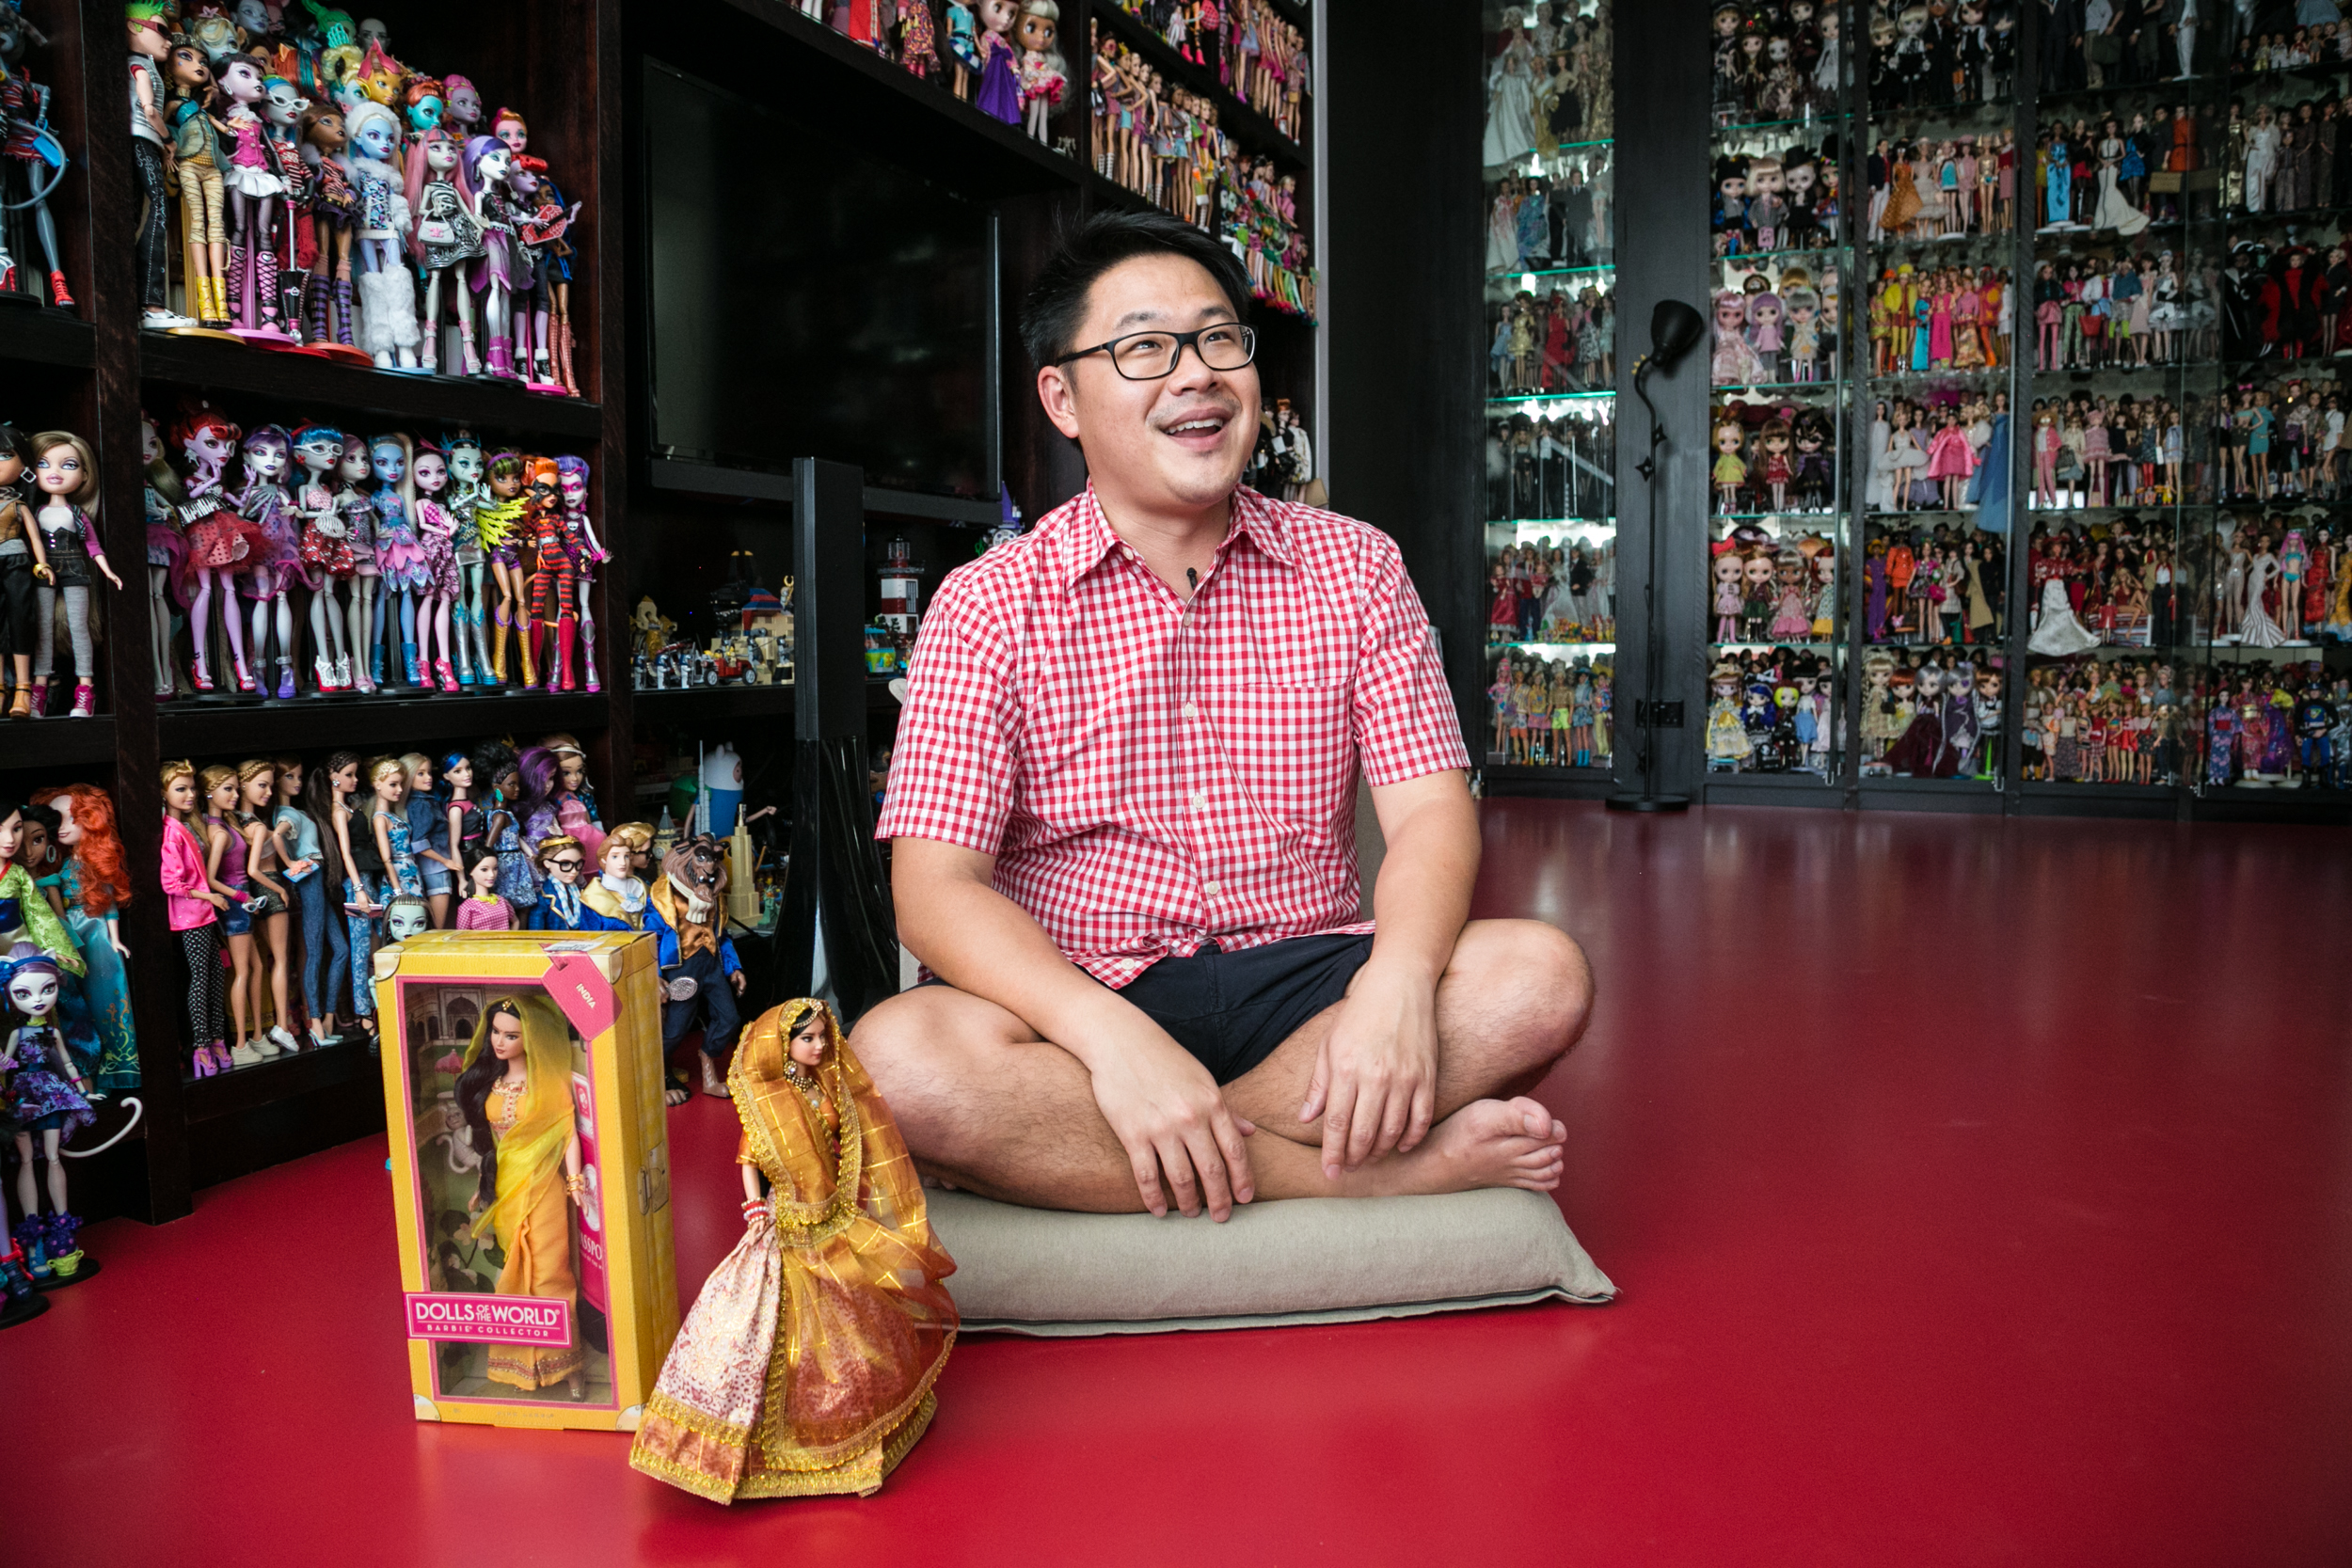 Jian Yang in his home surrounded by dolls. Photo: Eszter Papp